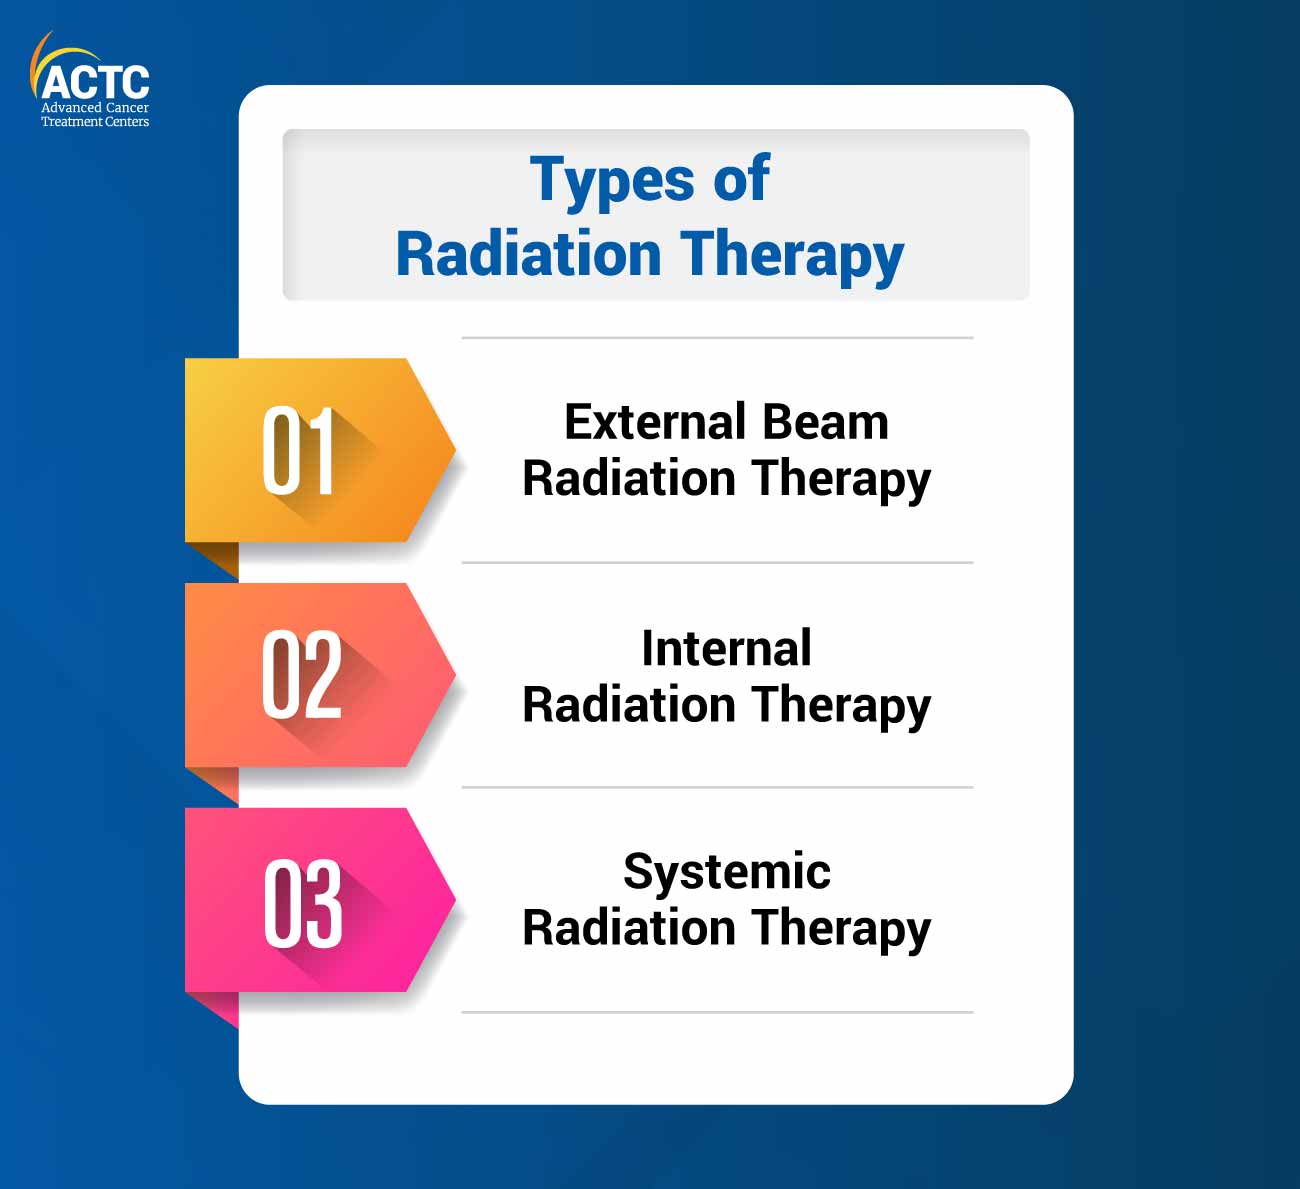 Types of Radiation Therapy for Cancer